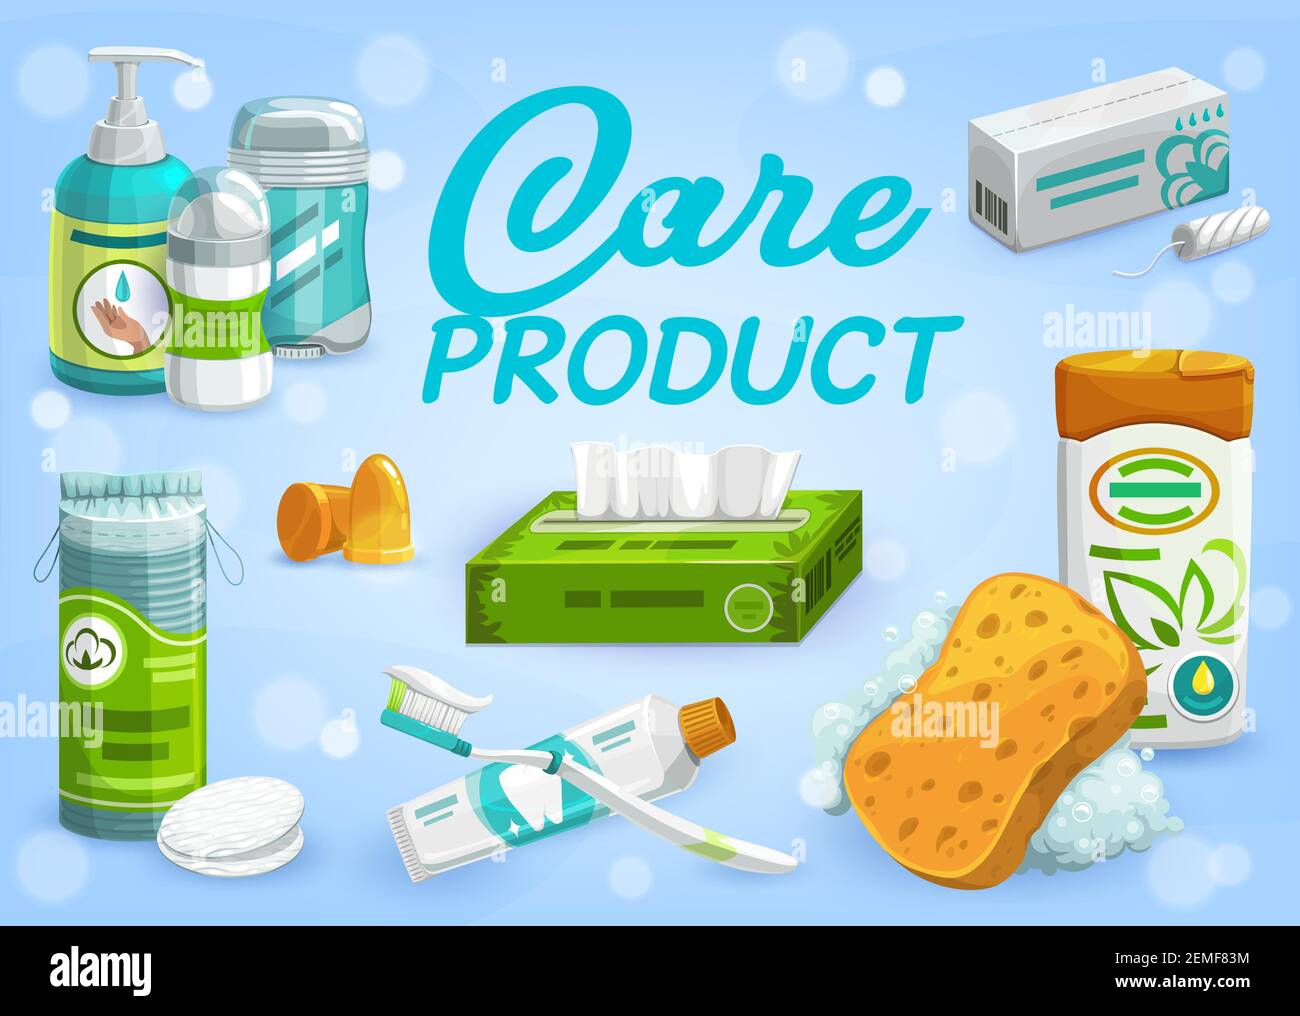 Hygiene, cosmetics and care products, vector. Liquid soap or hand cream, dry deodorant or antiperspirant, sanitary tampons, cotton discs and napkins, Stock Vector